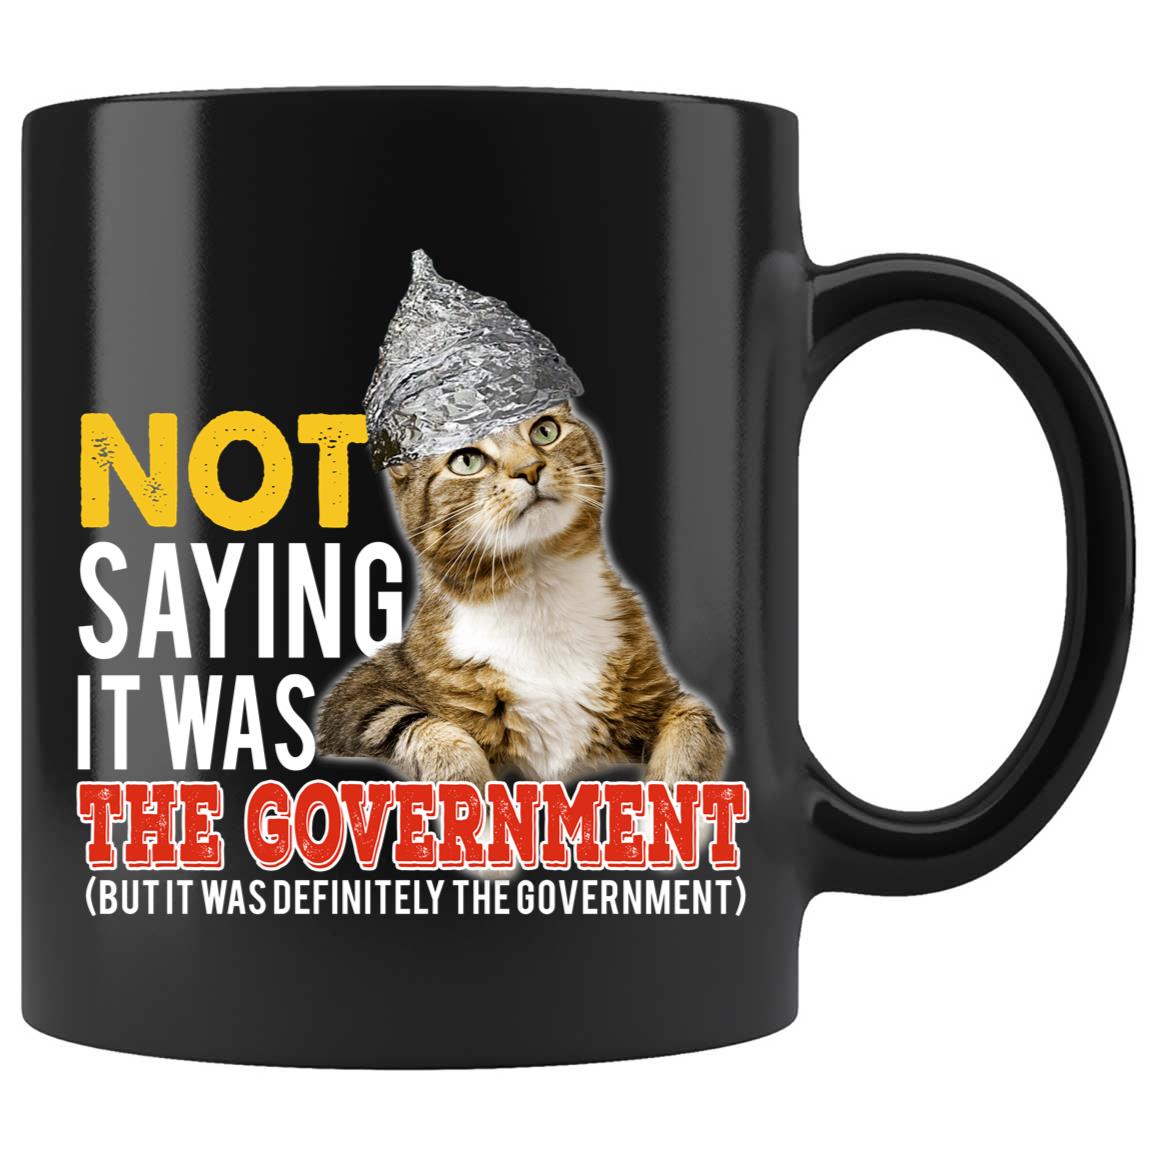 Skitongifts Coffee Mug Funny Ceramic Novelty NH191221-Cat Tin Foil Hat Conspiracy. Not Saying It Was The Government Tcmvrlb